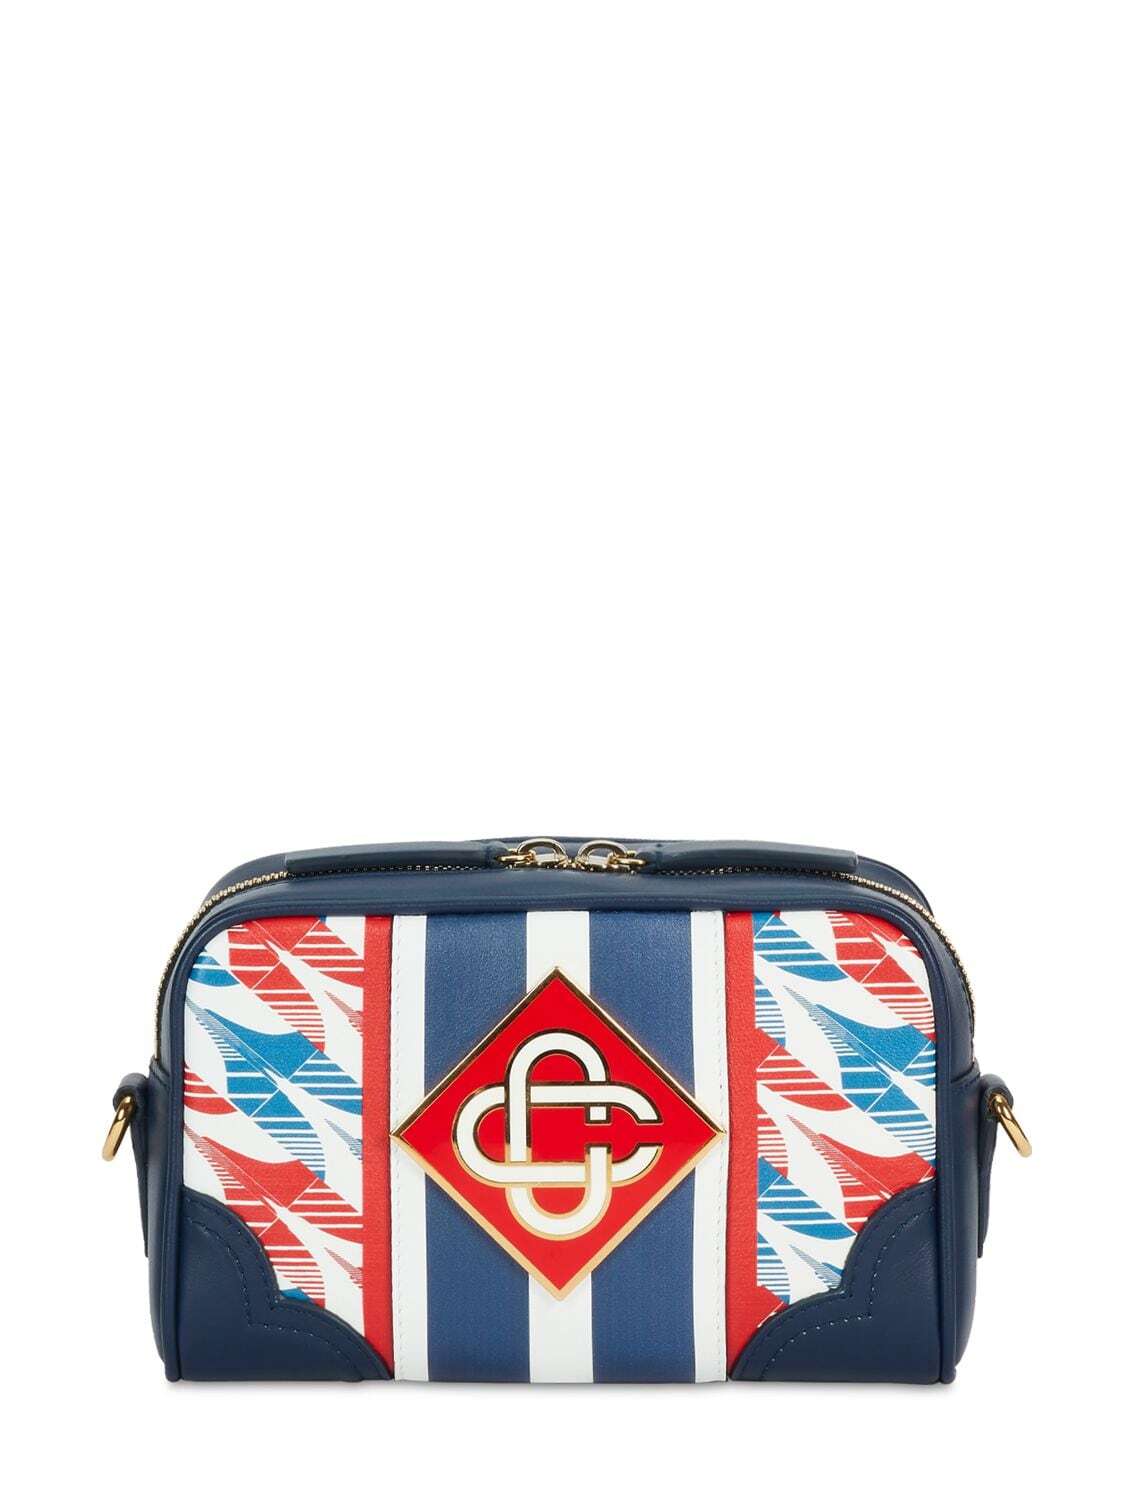 CASABLANCA Logo Printed Leather Camera Bag in blue / red / white